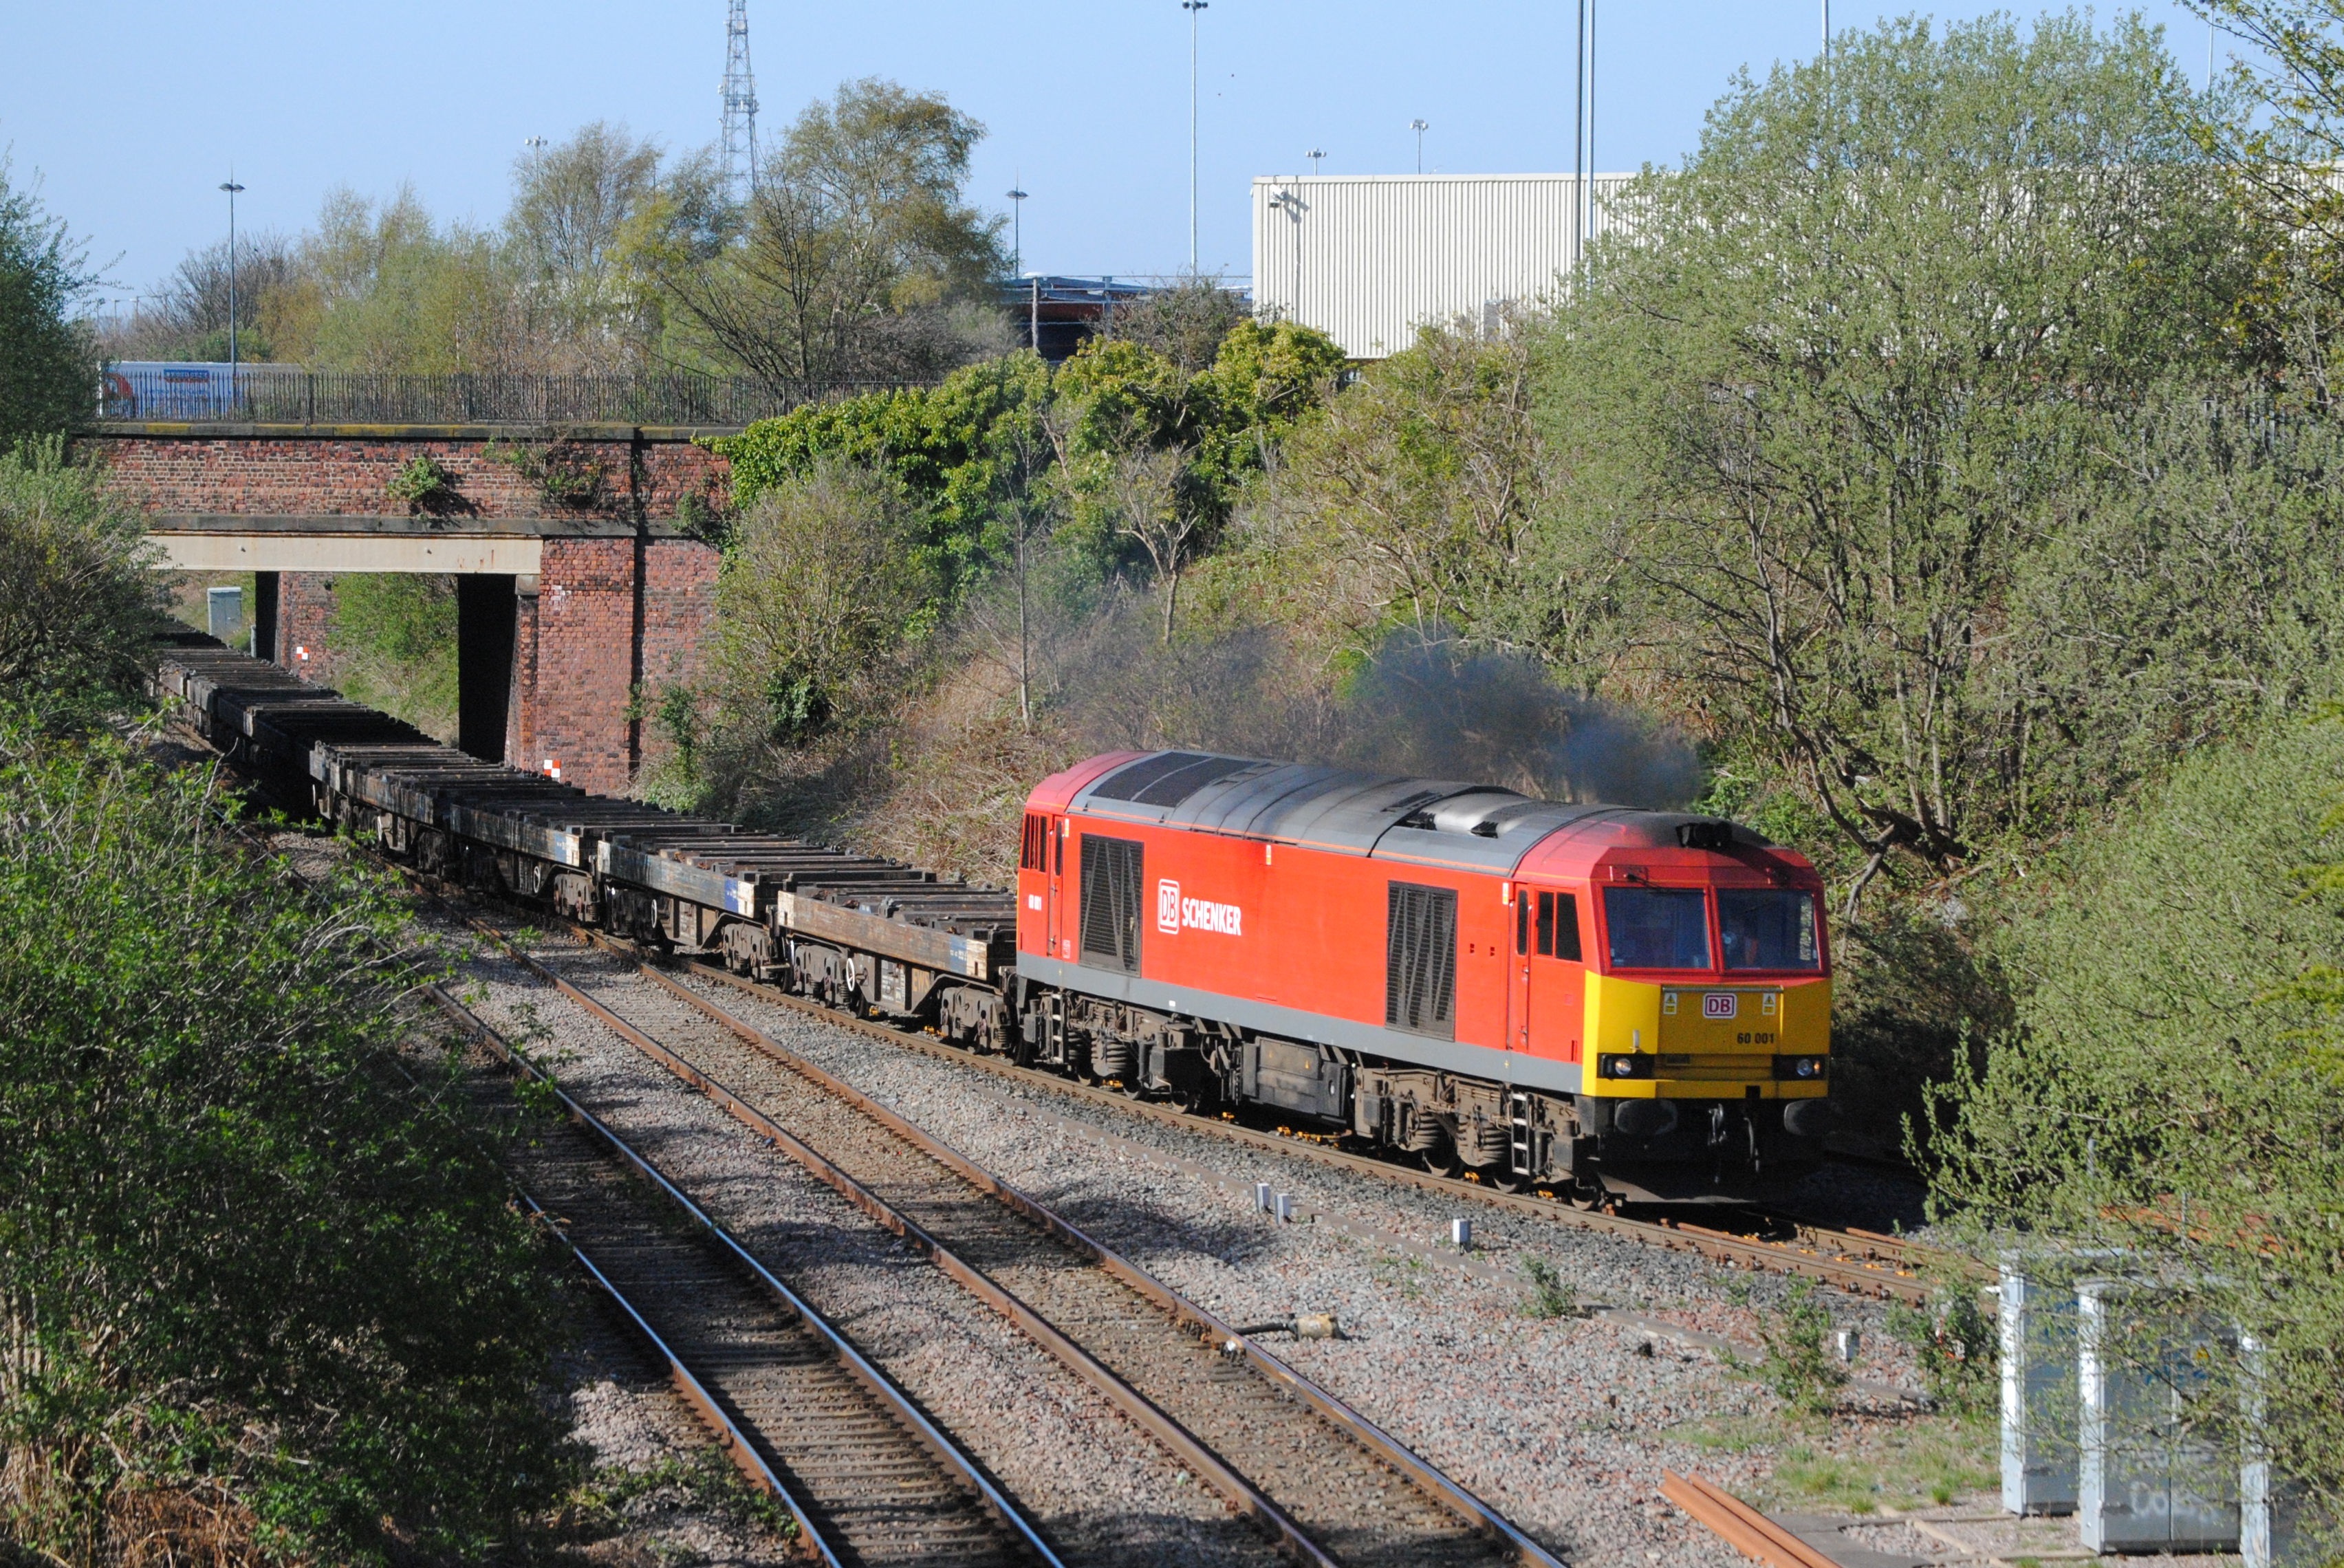 60001 at Edge Lane Junction working 6E14 16.10 FO Seaforth-Tinsley steel empties on 18th April 2014. John Cashen